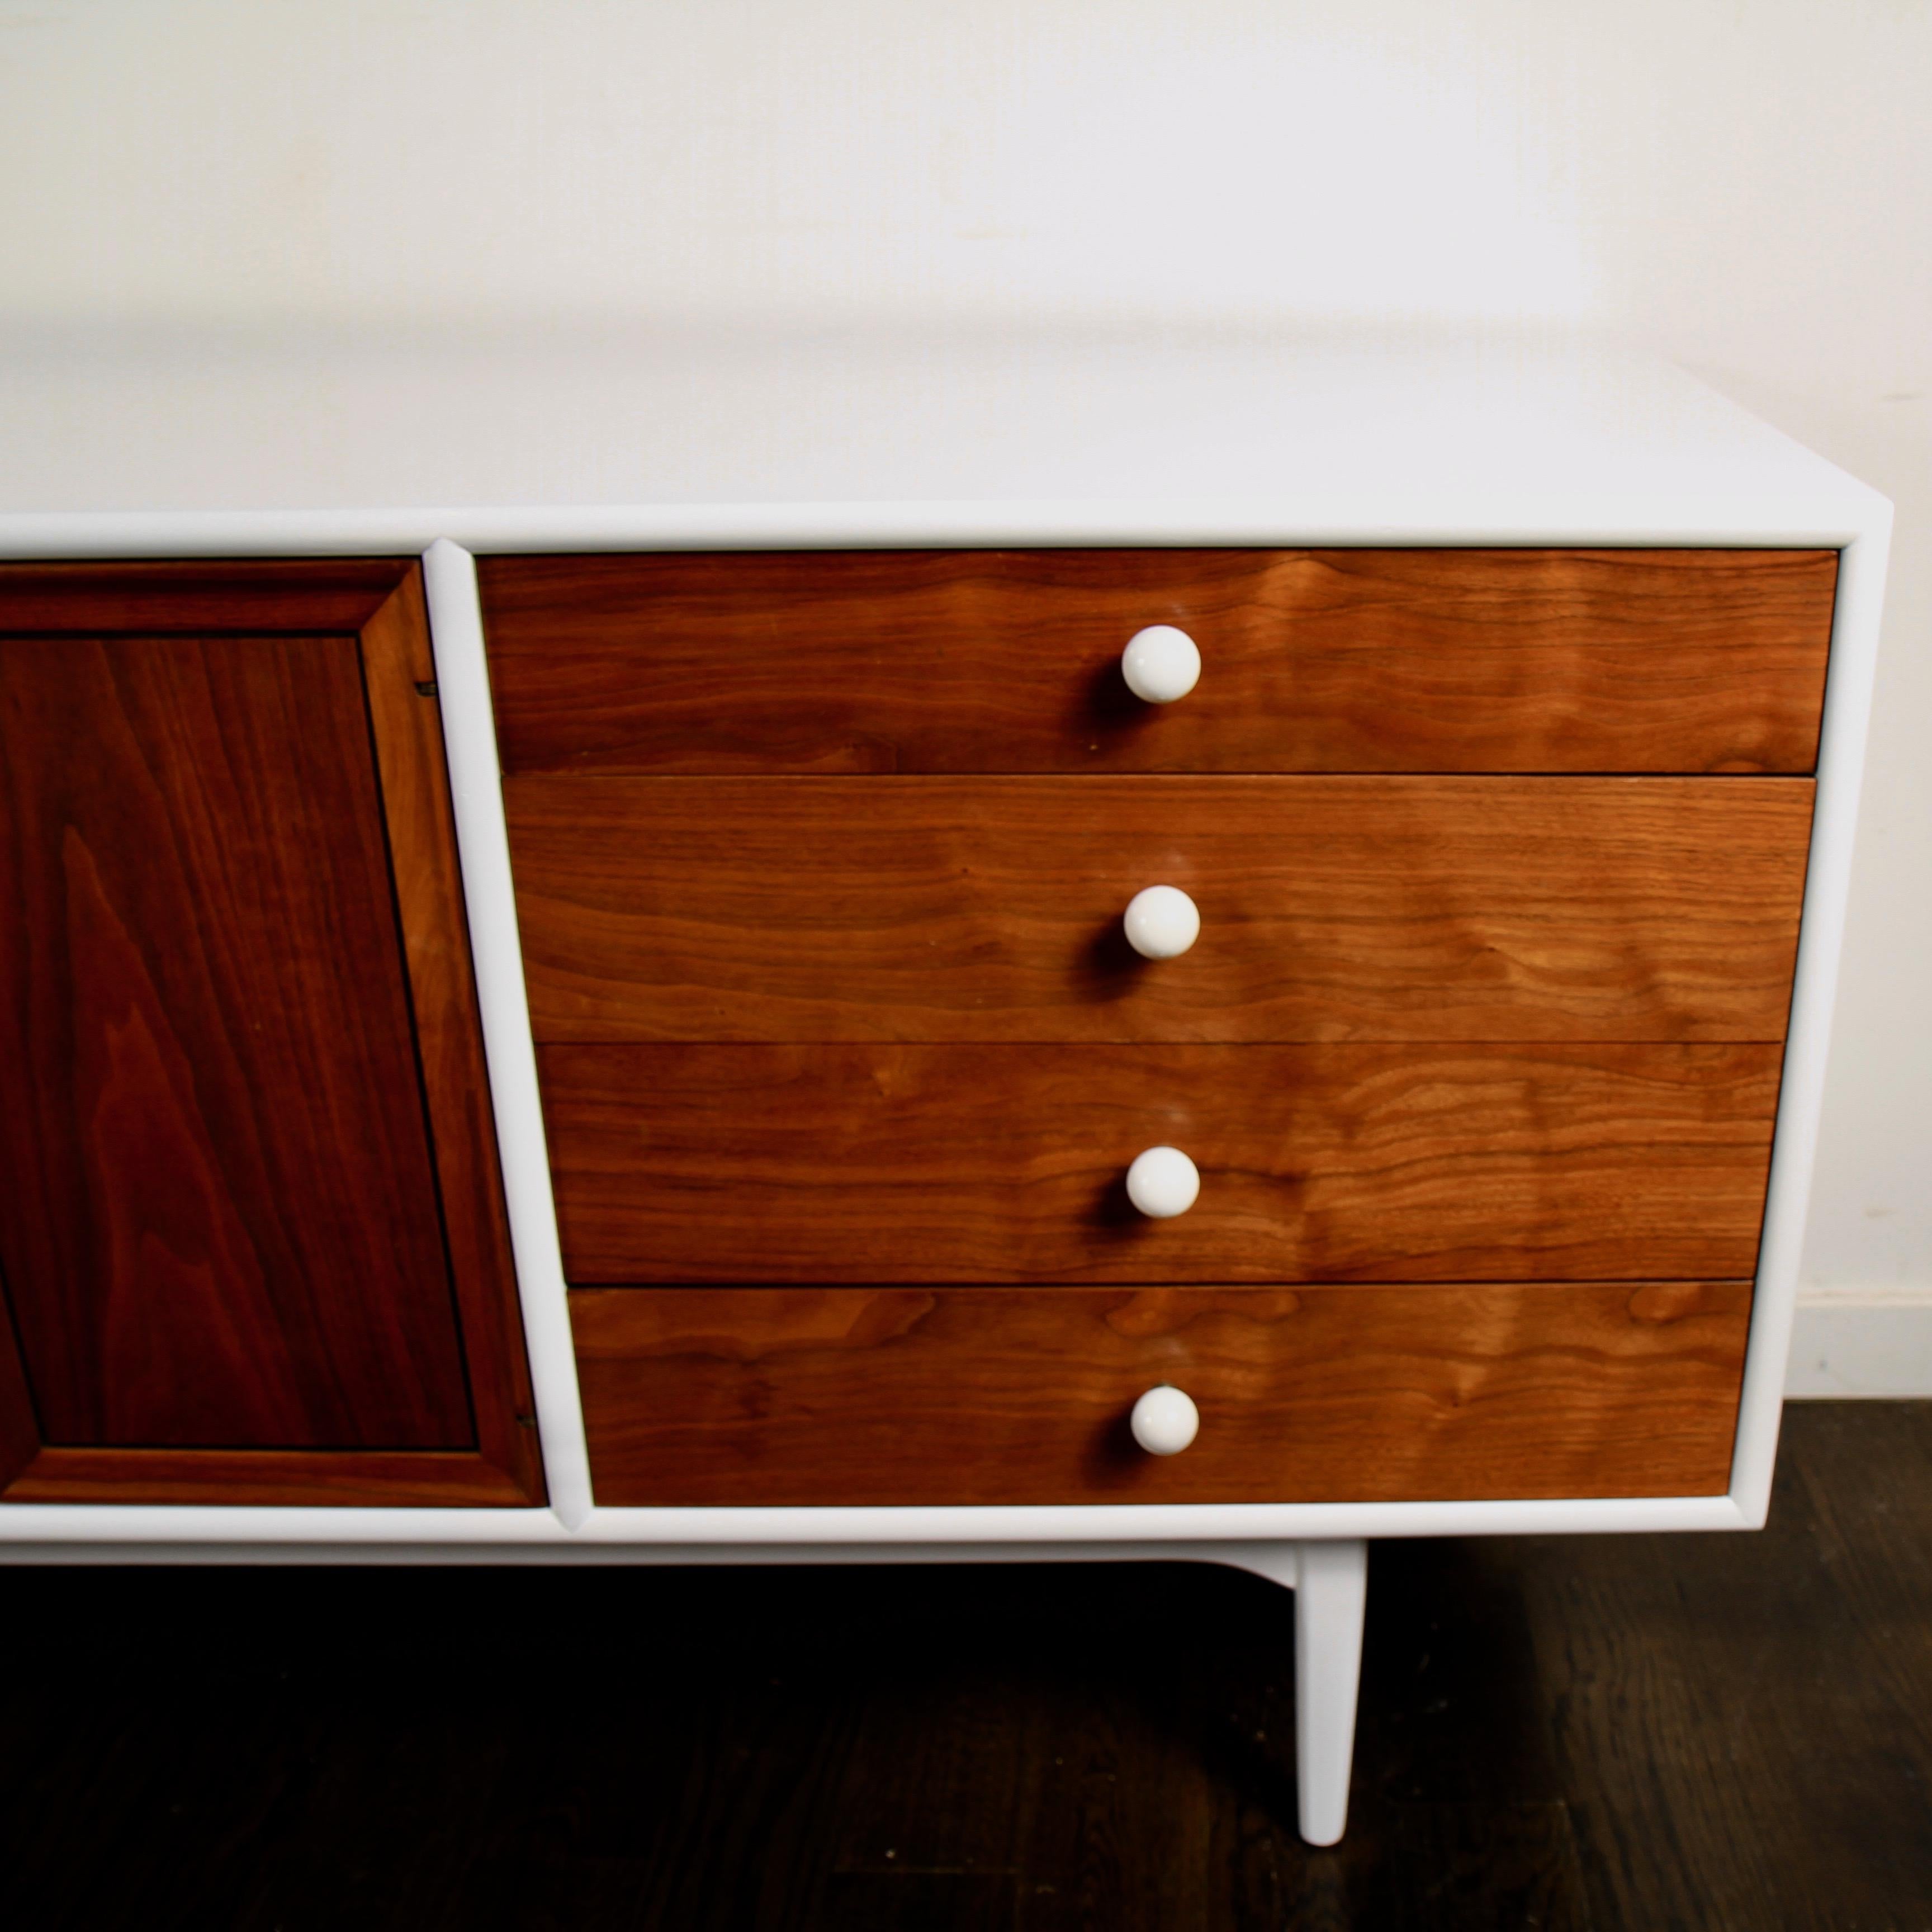 Classic midcentury low dresser designed by Kipp Stewart and Stewart MacDougall for Drexel. It's been updated with a white lacquered frame that contrasts nicely with the original white porcelain knobs.